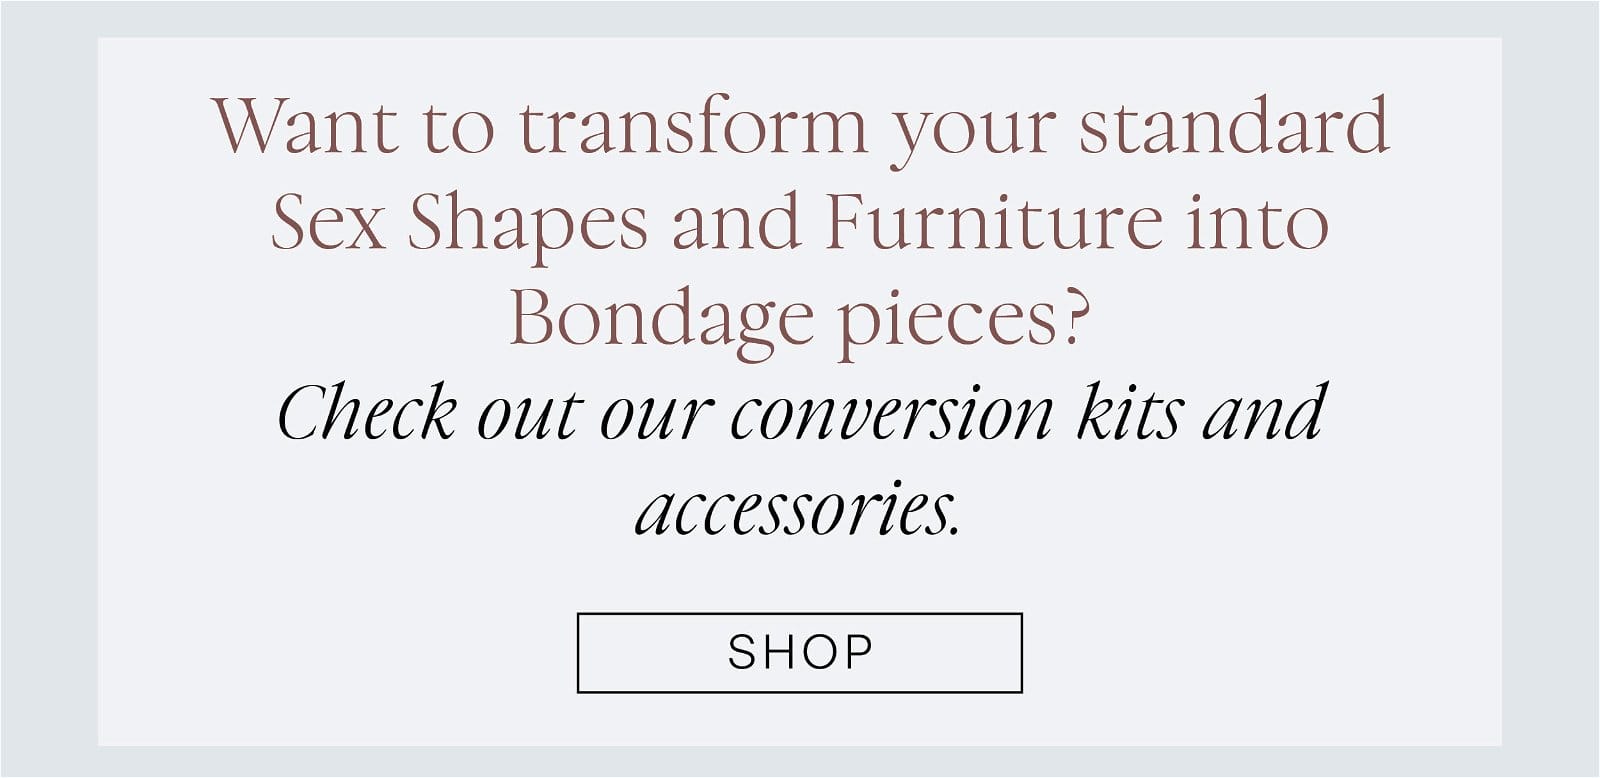 Want to transform your standard Sex Shapes and Furniture into Black Label bondage pieces?\xa0 Check out our conversion kits and accessories.